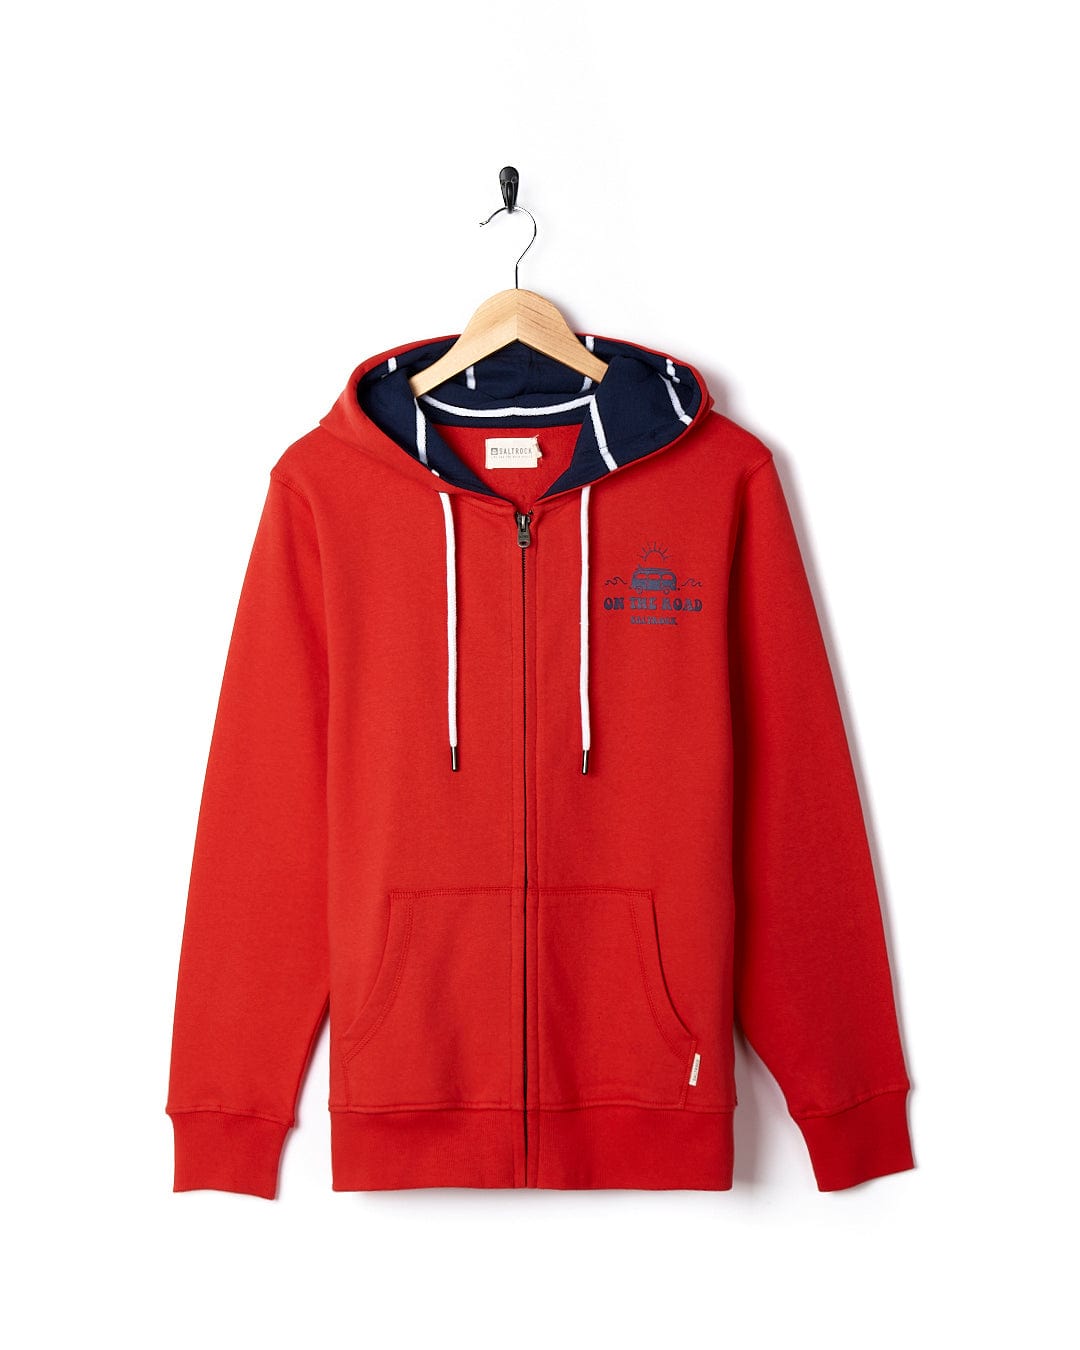 A Saltrock red hooded sweatshirt with a navy logo, specifically the On The Road - Womens Zip Hoodie - Red.